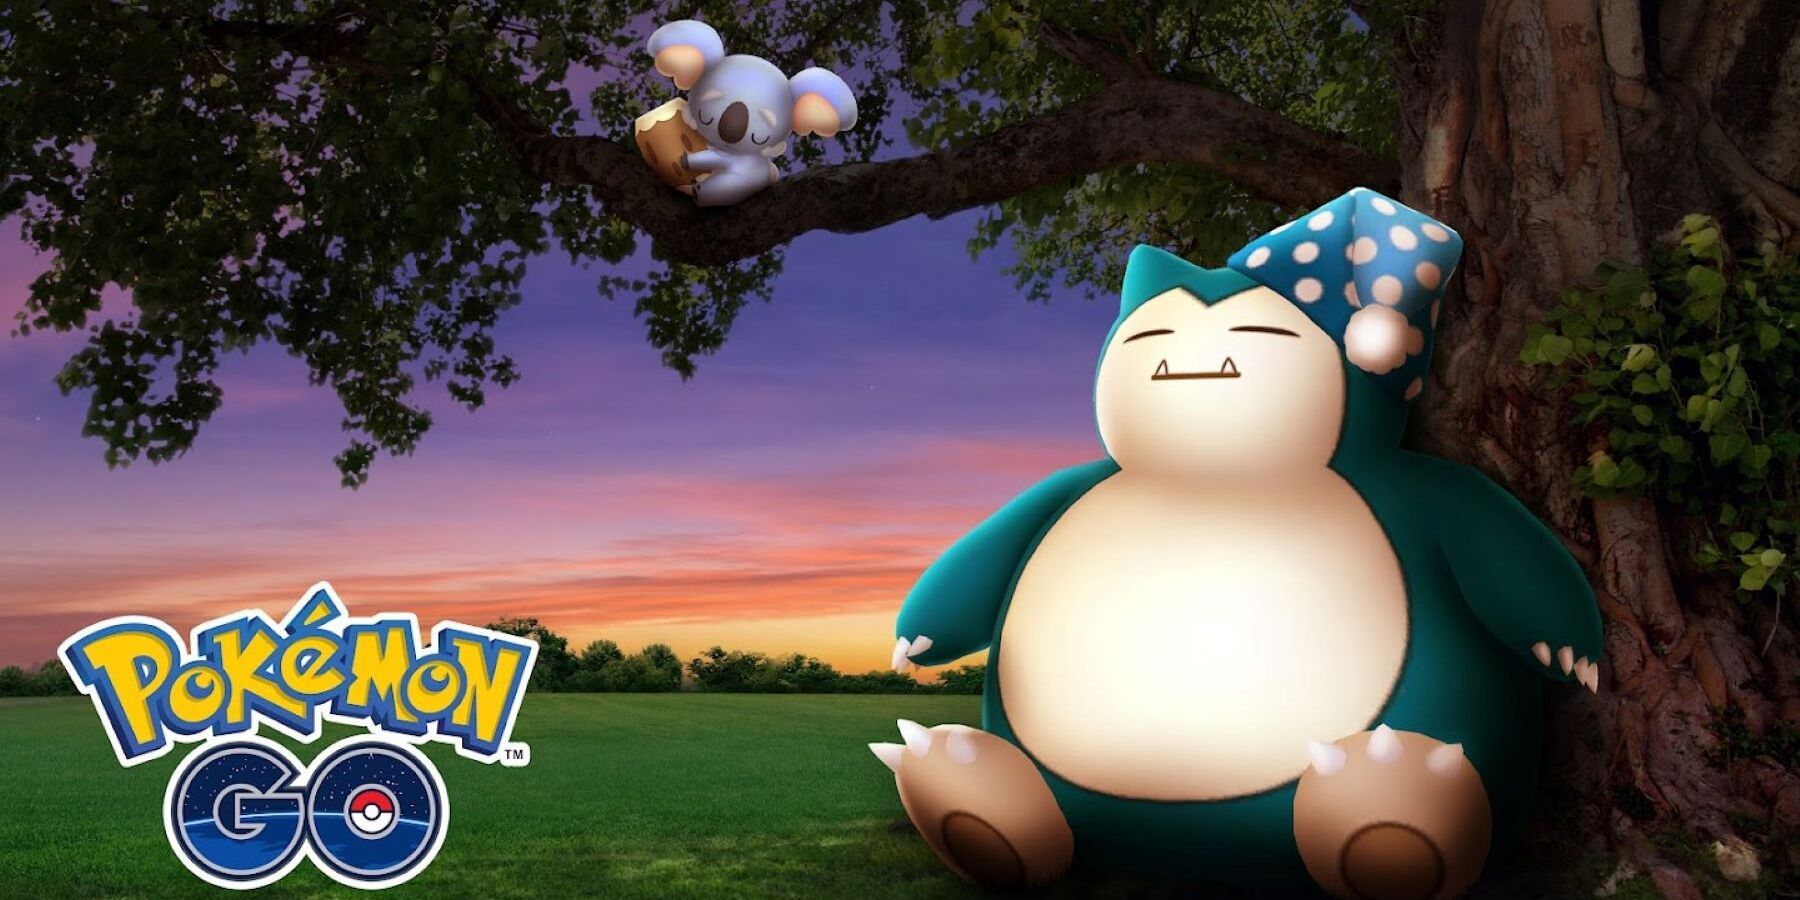 image showing the nightcap snorlax debut in pokemon go.